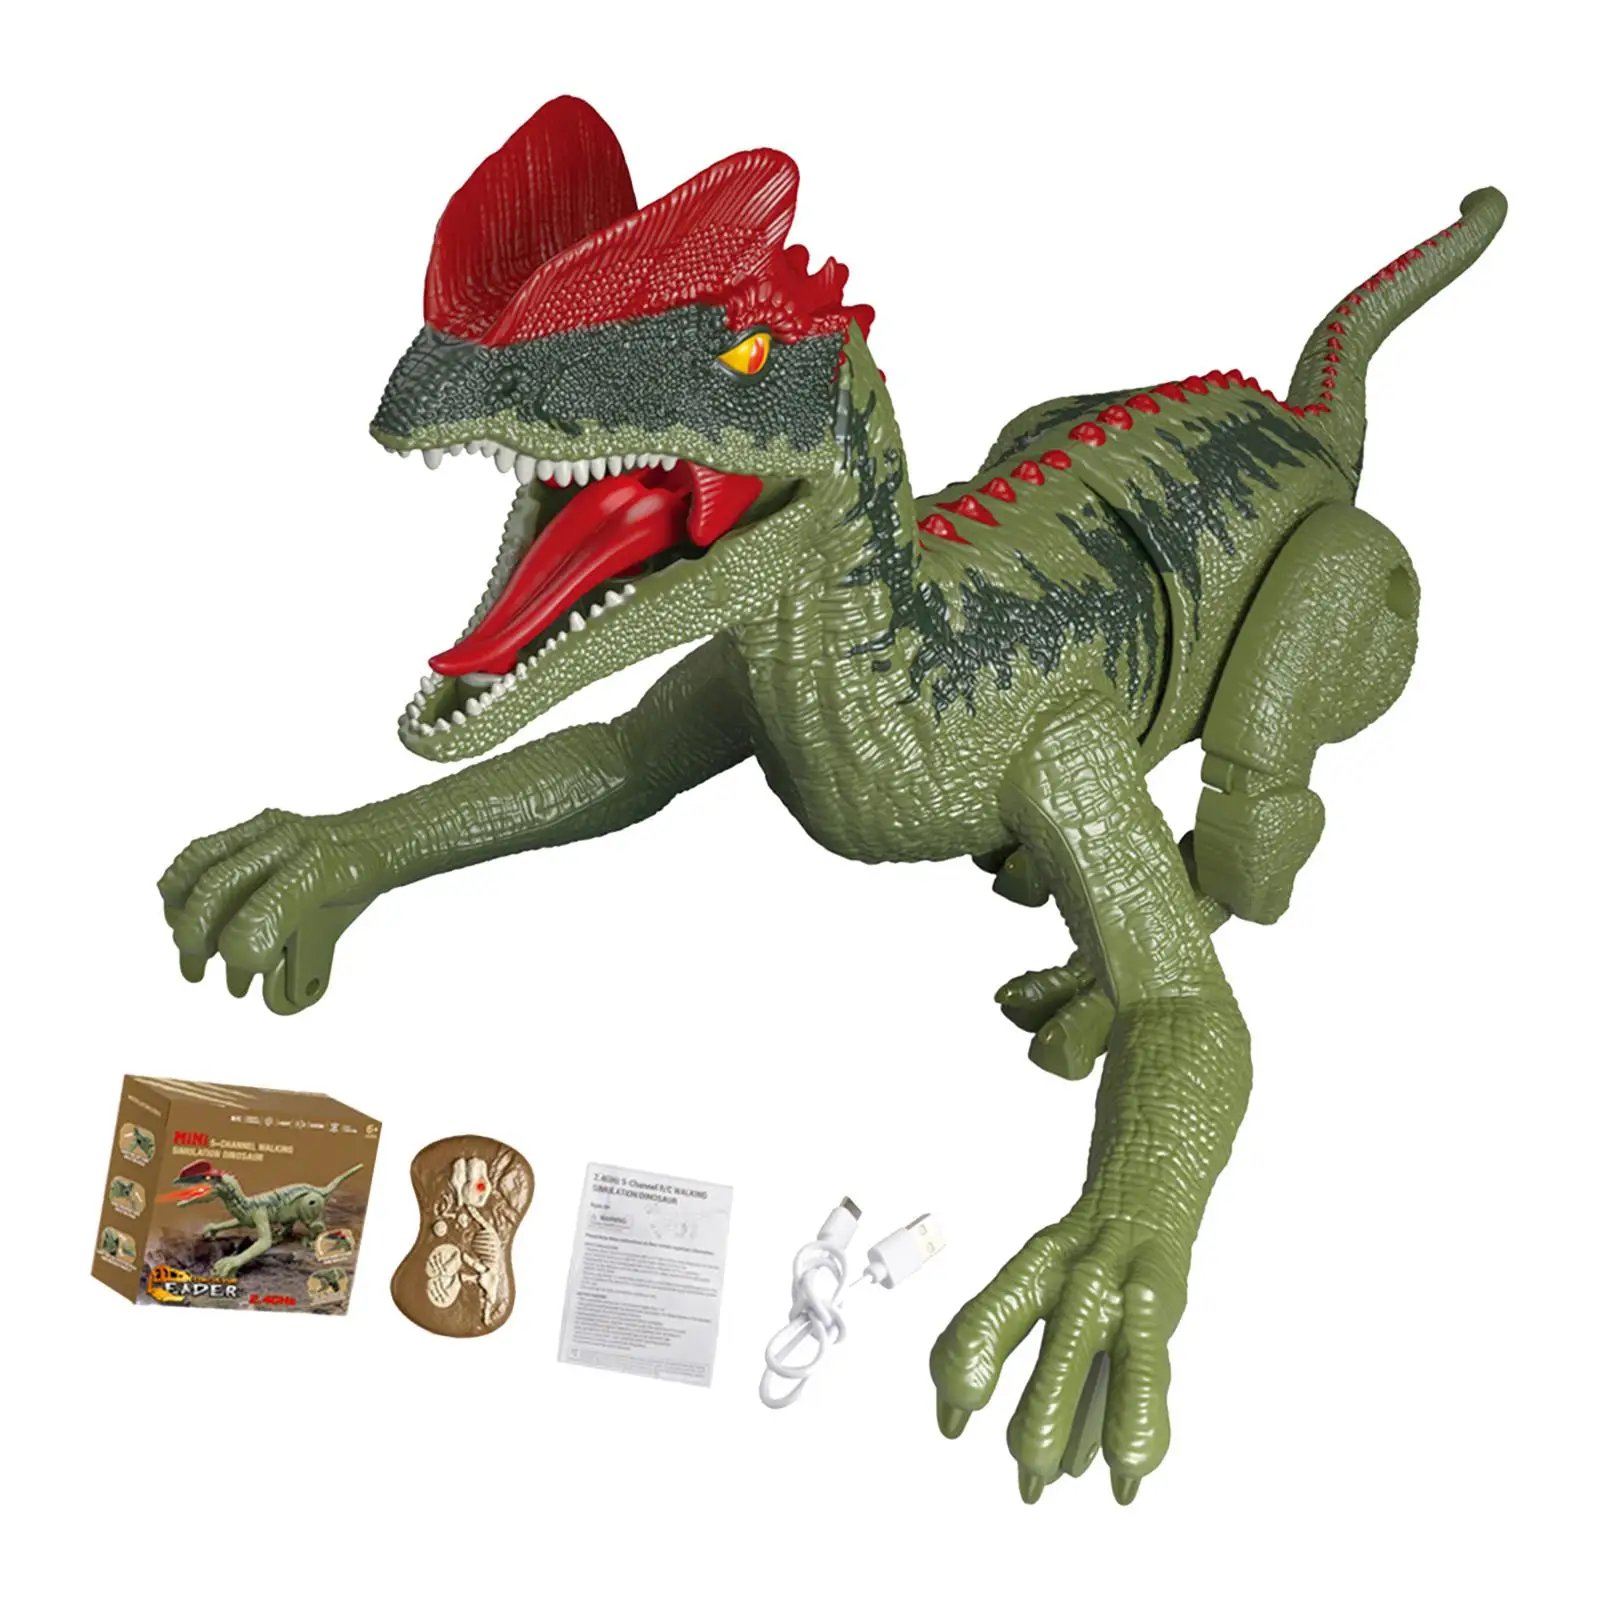 Robot Dinosaur Realistic Educational Toys Dinosaur Toy Remote Controlled Dinosaur for Girls Boys Children Kids Holiday Gifts